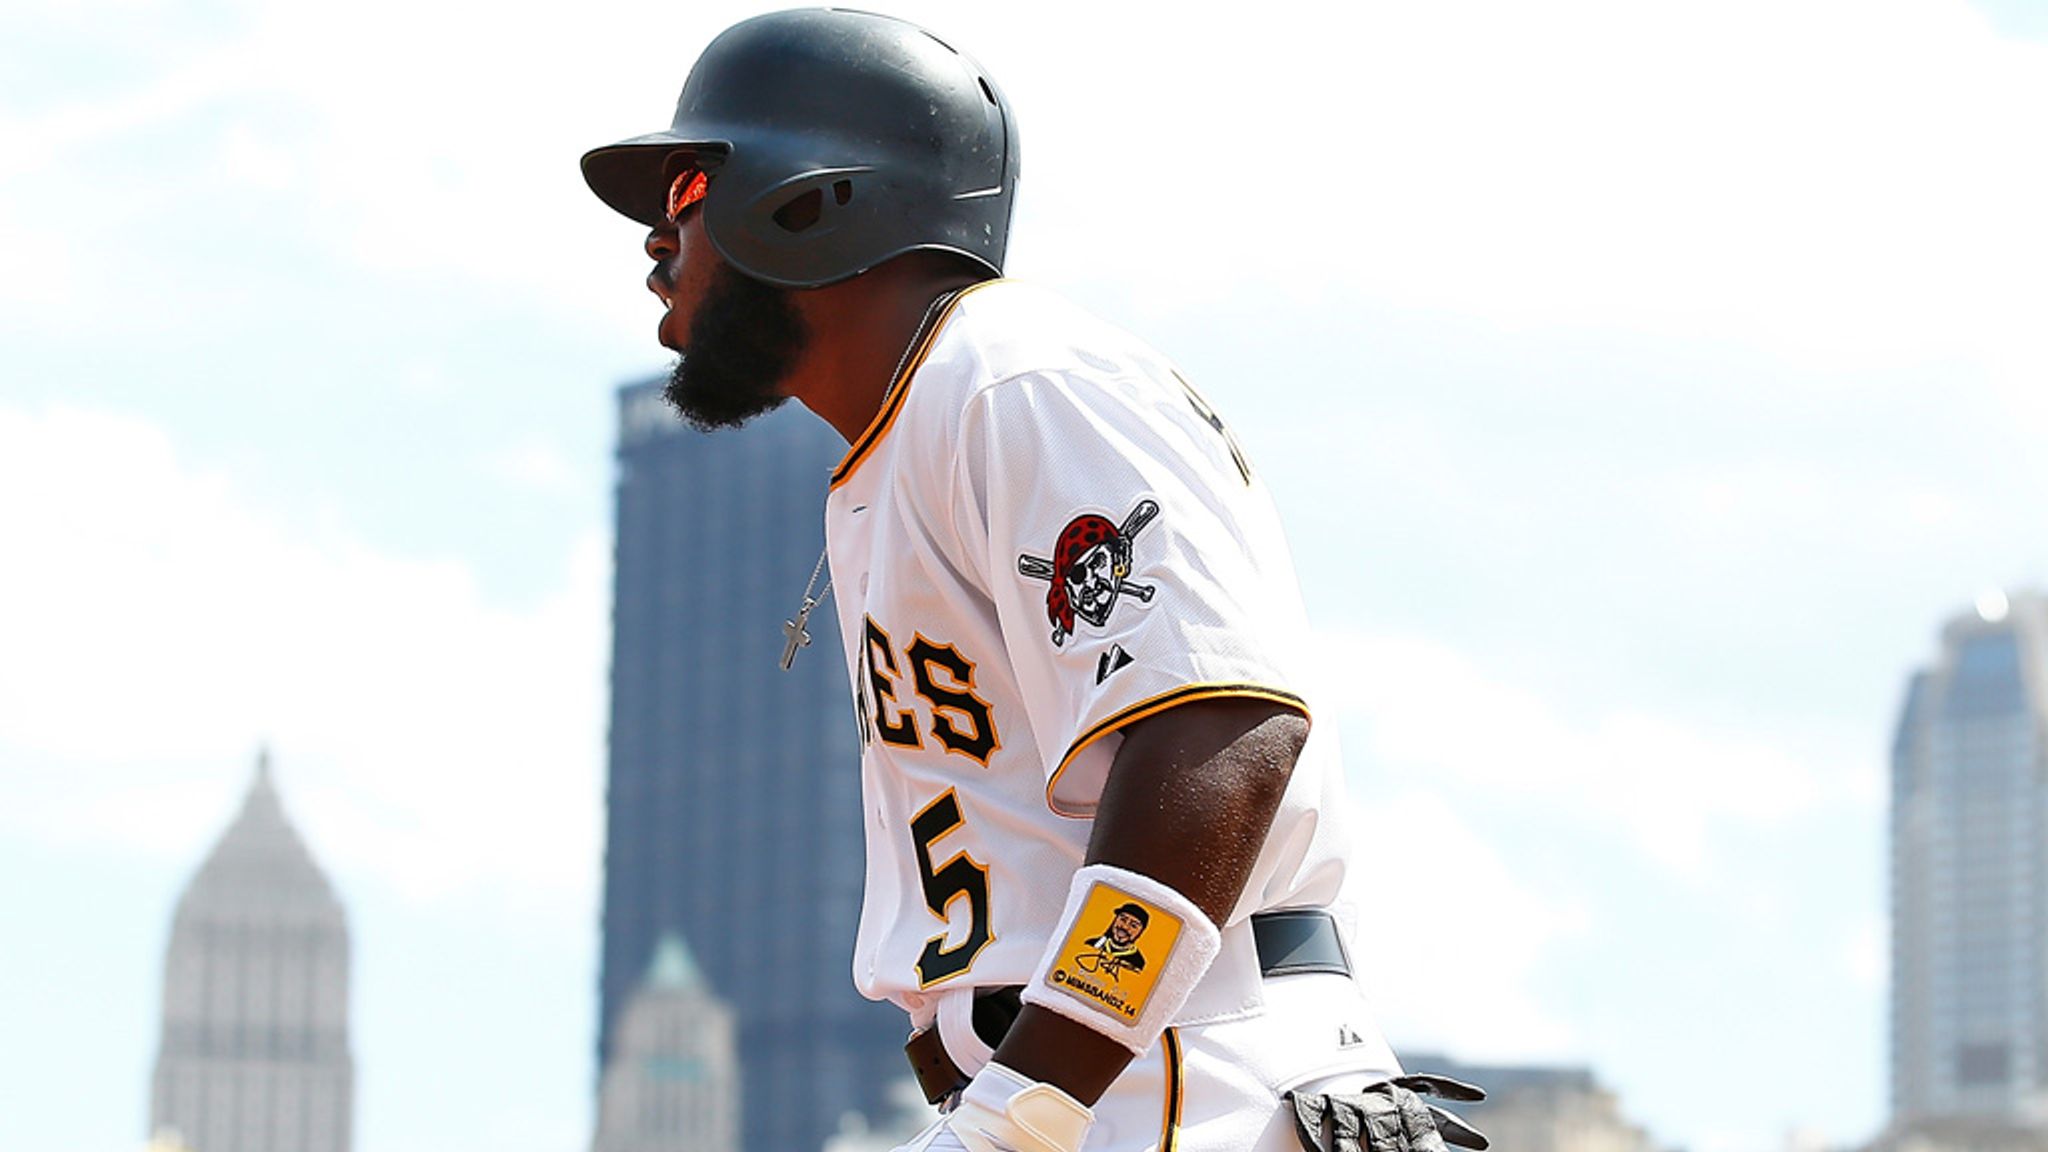 What Should the Pittsburgh Pirates Do with Josh Harrison?